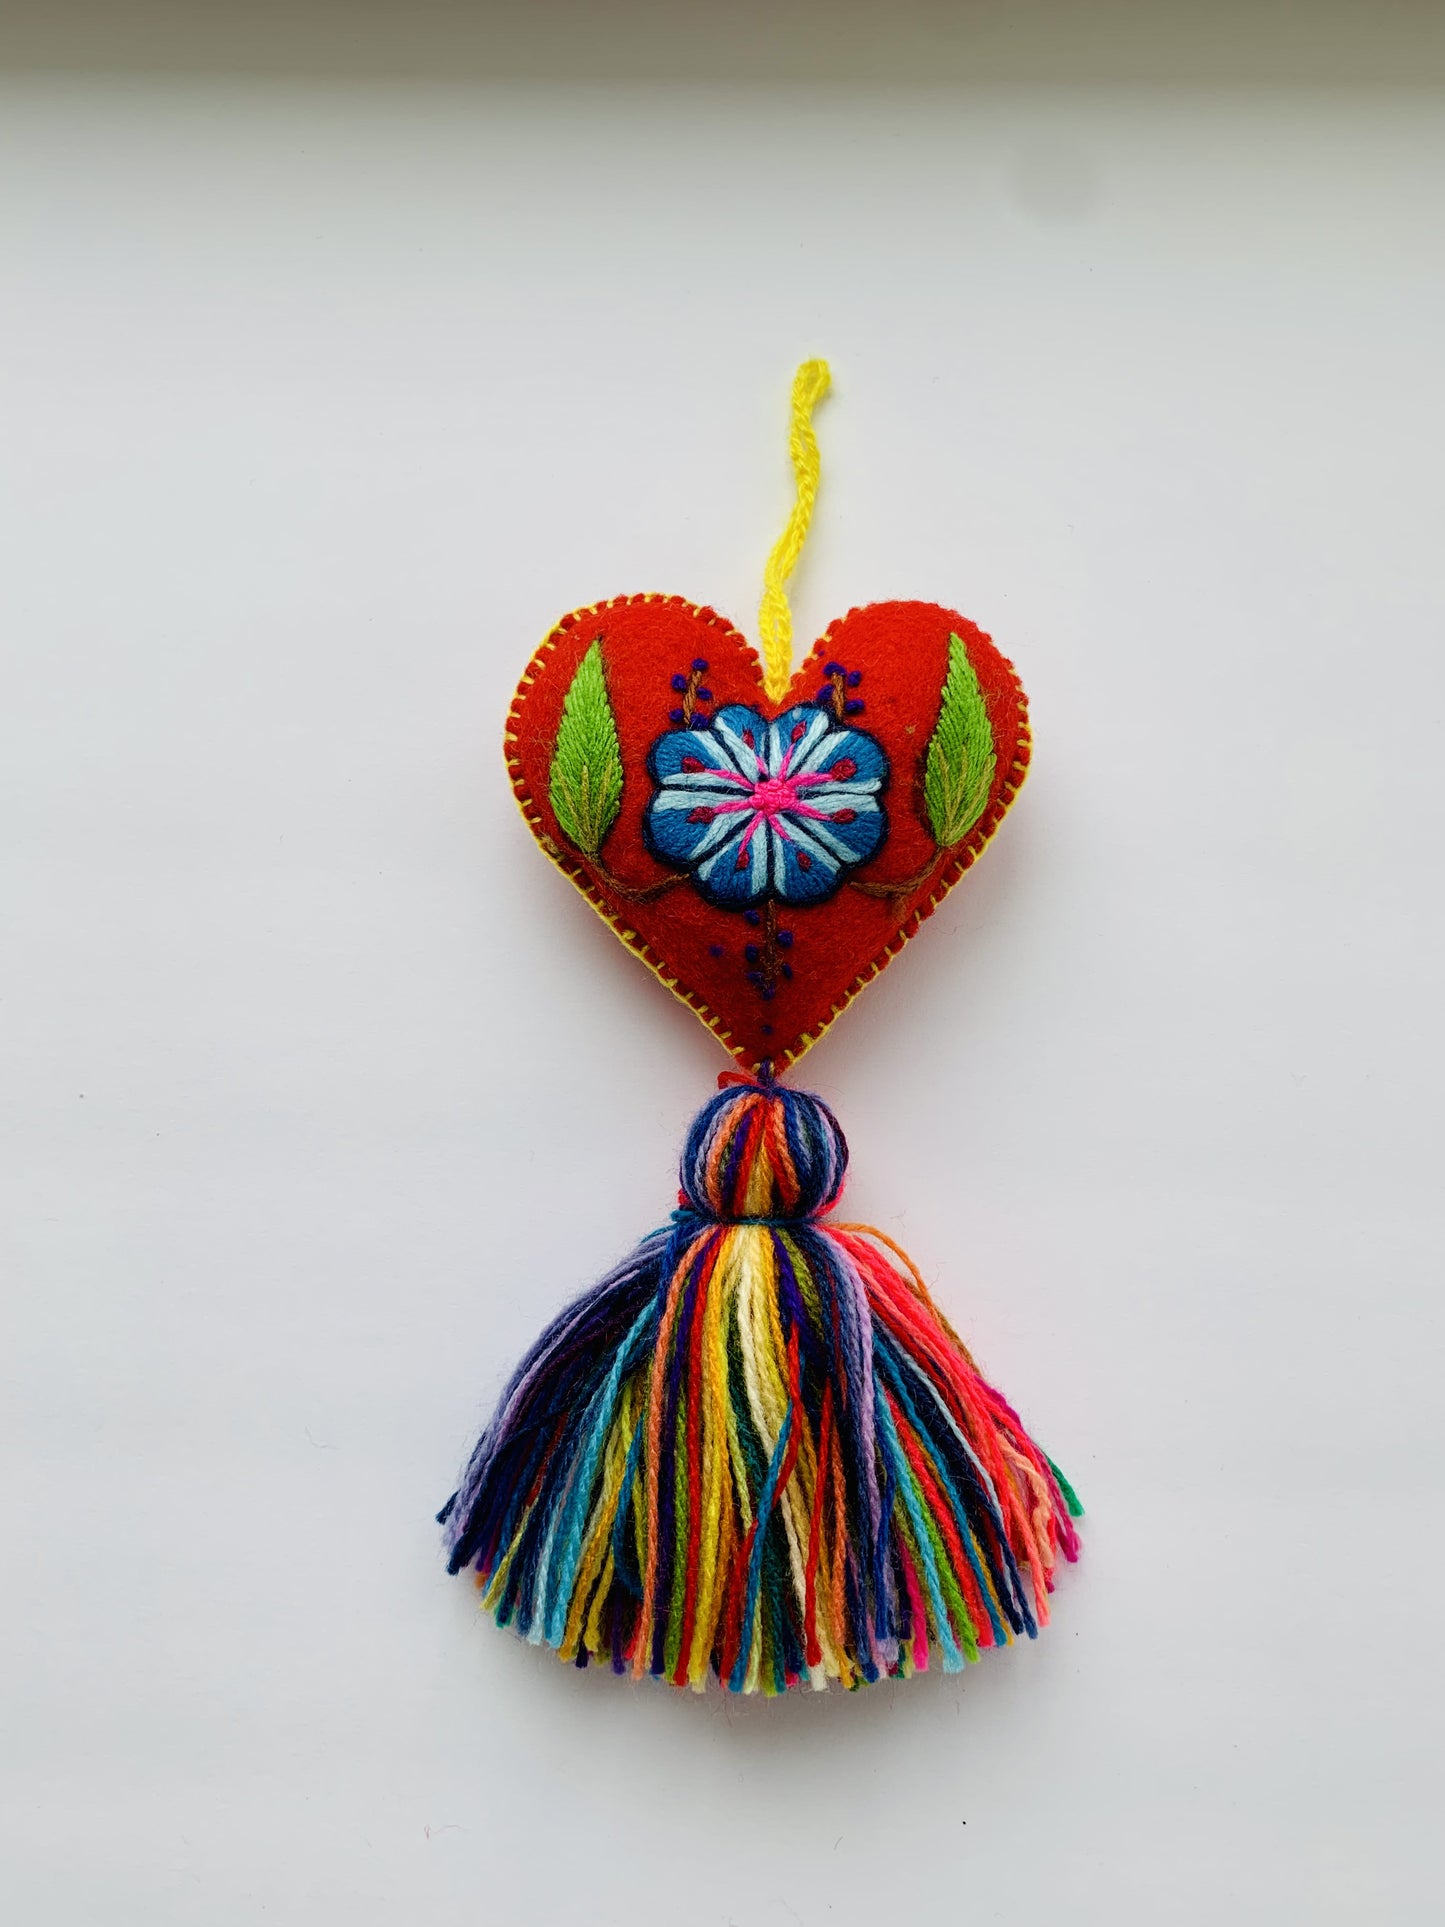 Embroidered wool heart ornament